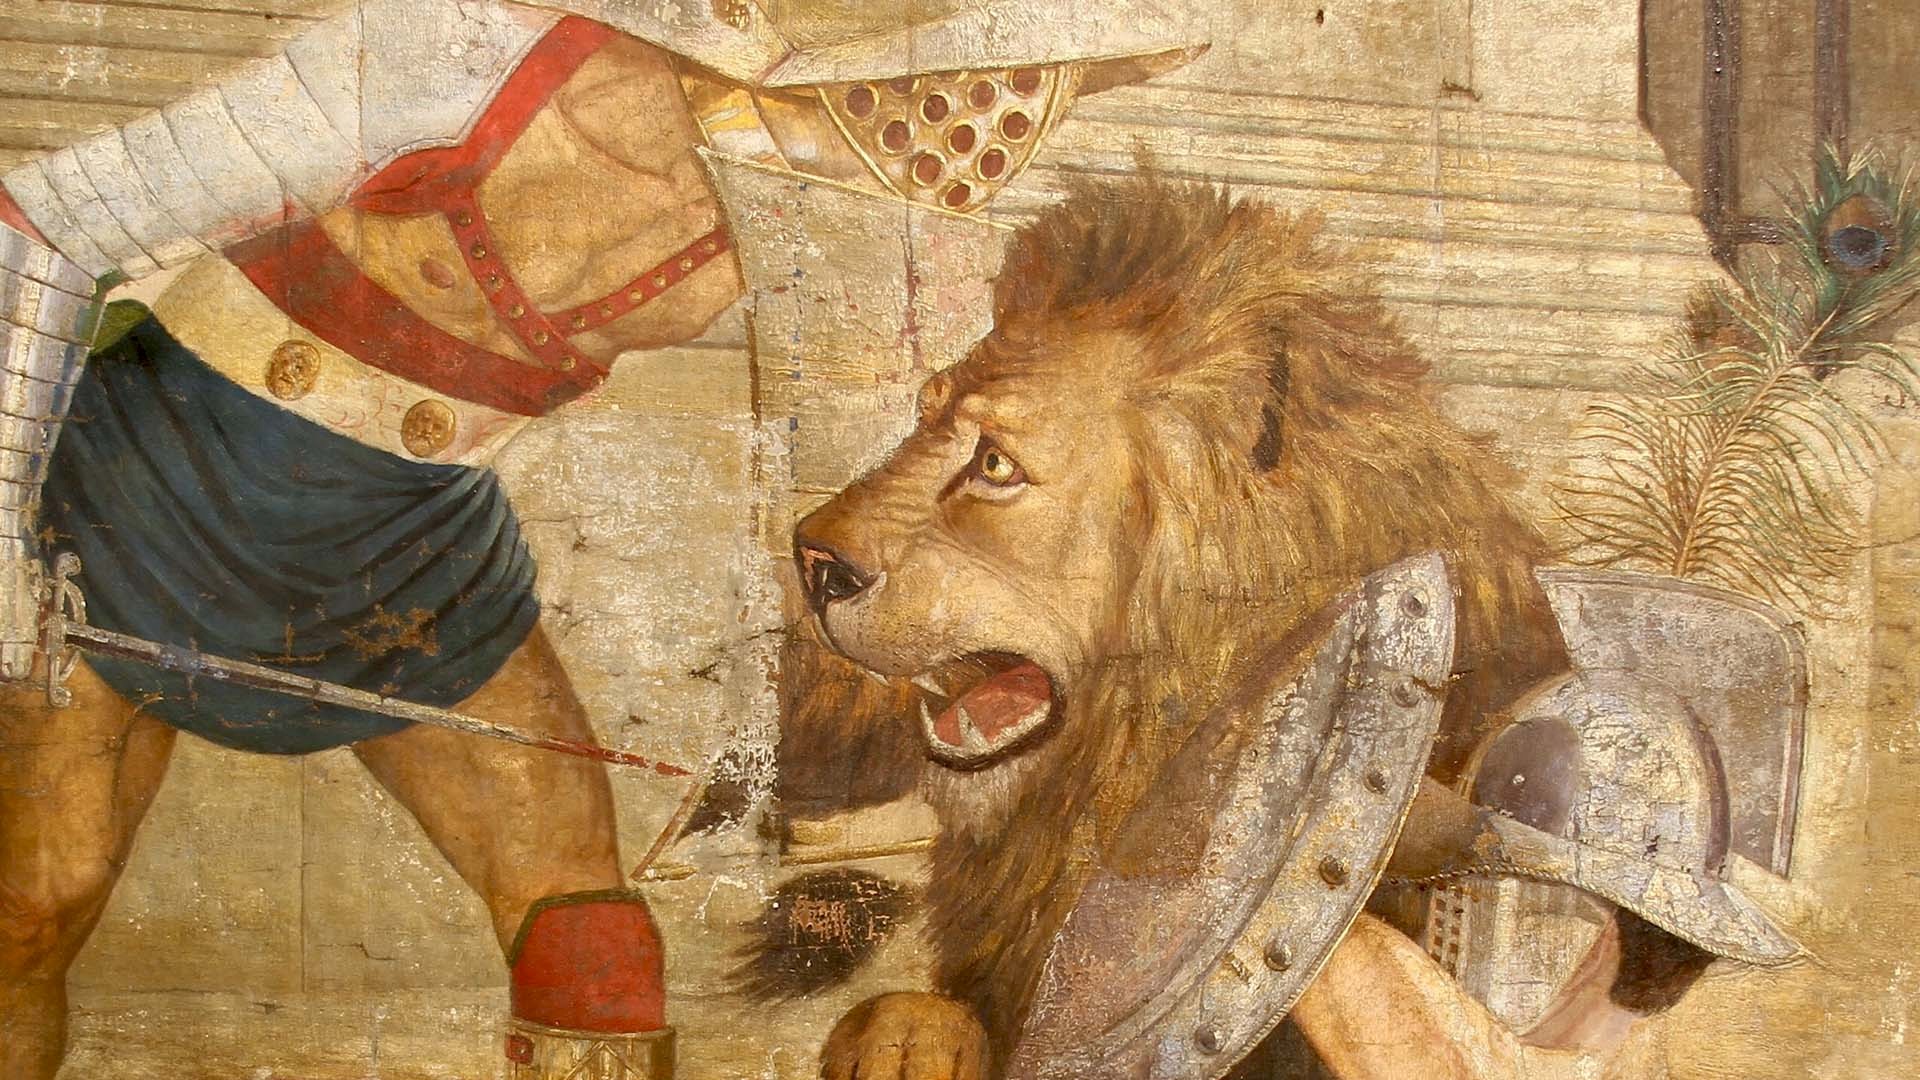 Not just lions in the Colosseum | New Rome Free Tour